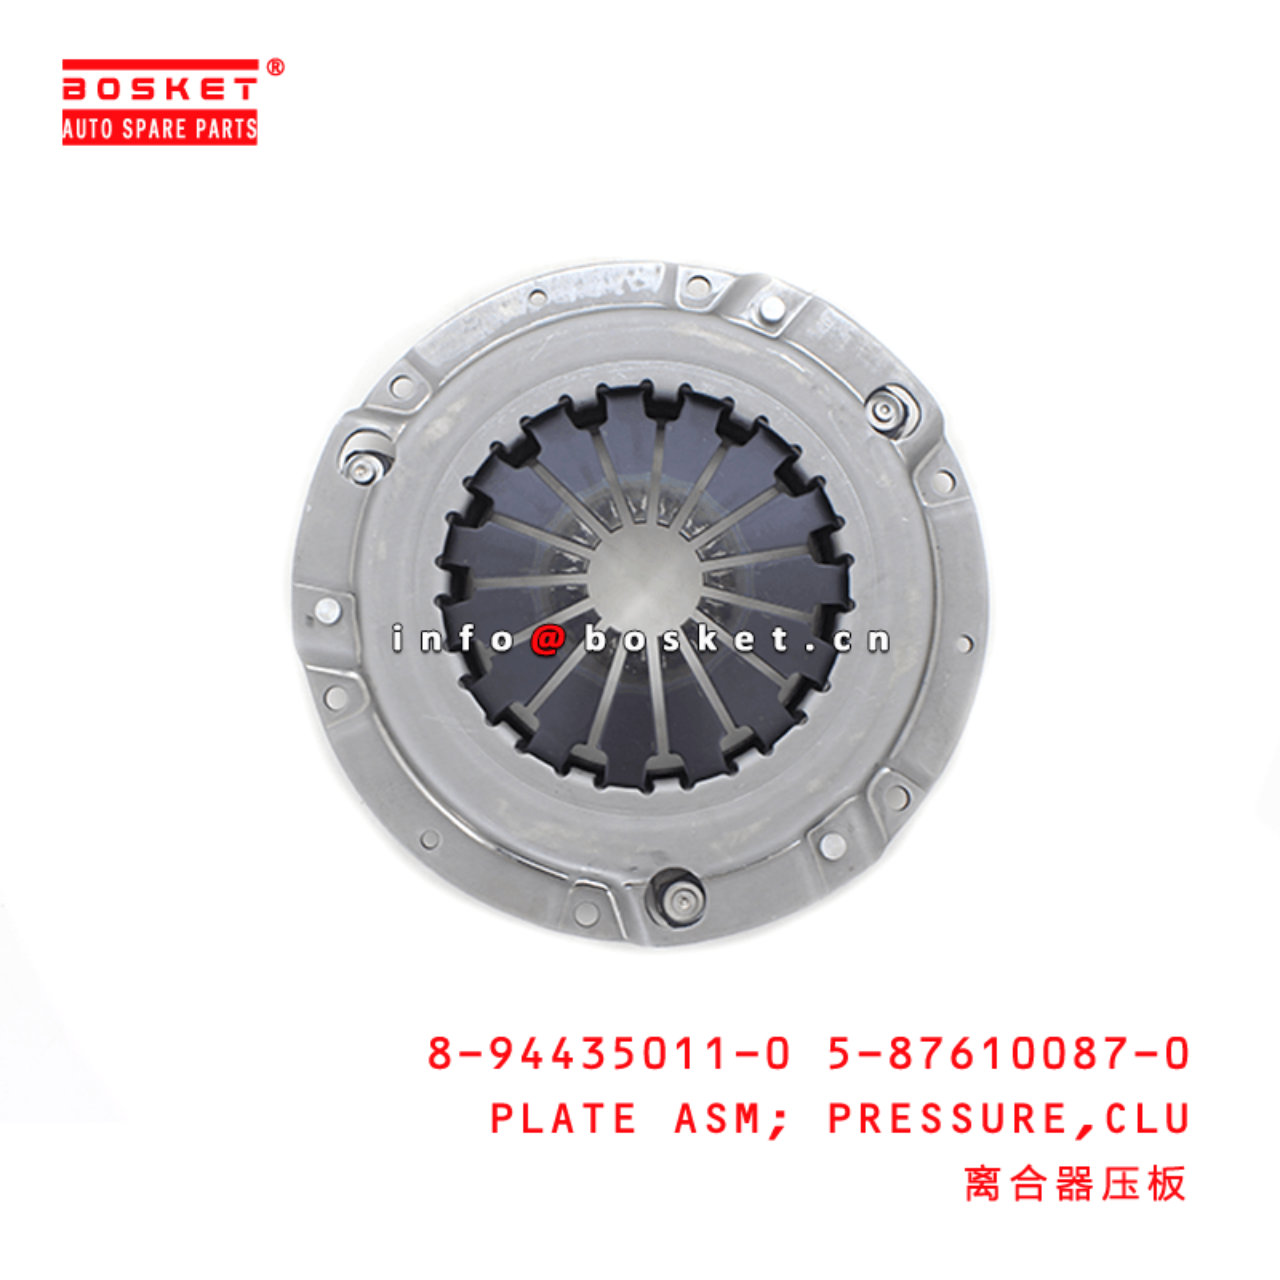 8-94435011-0 5-87610087-0 Clutch Pressure Plate Assembly 8944350110 5876100870 Suitable for ISUZU TF